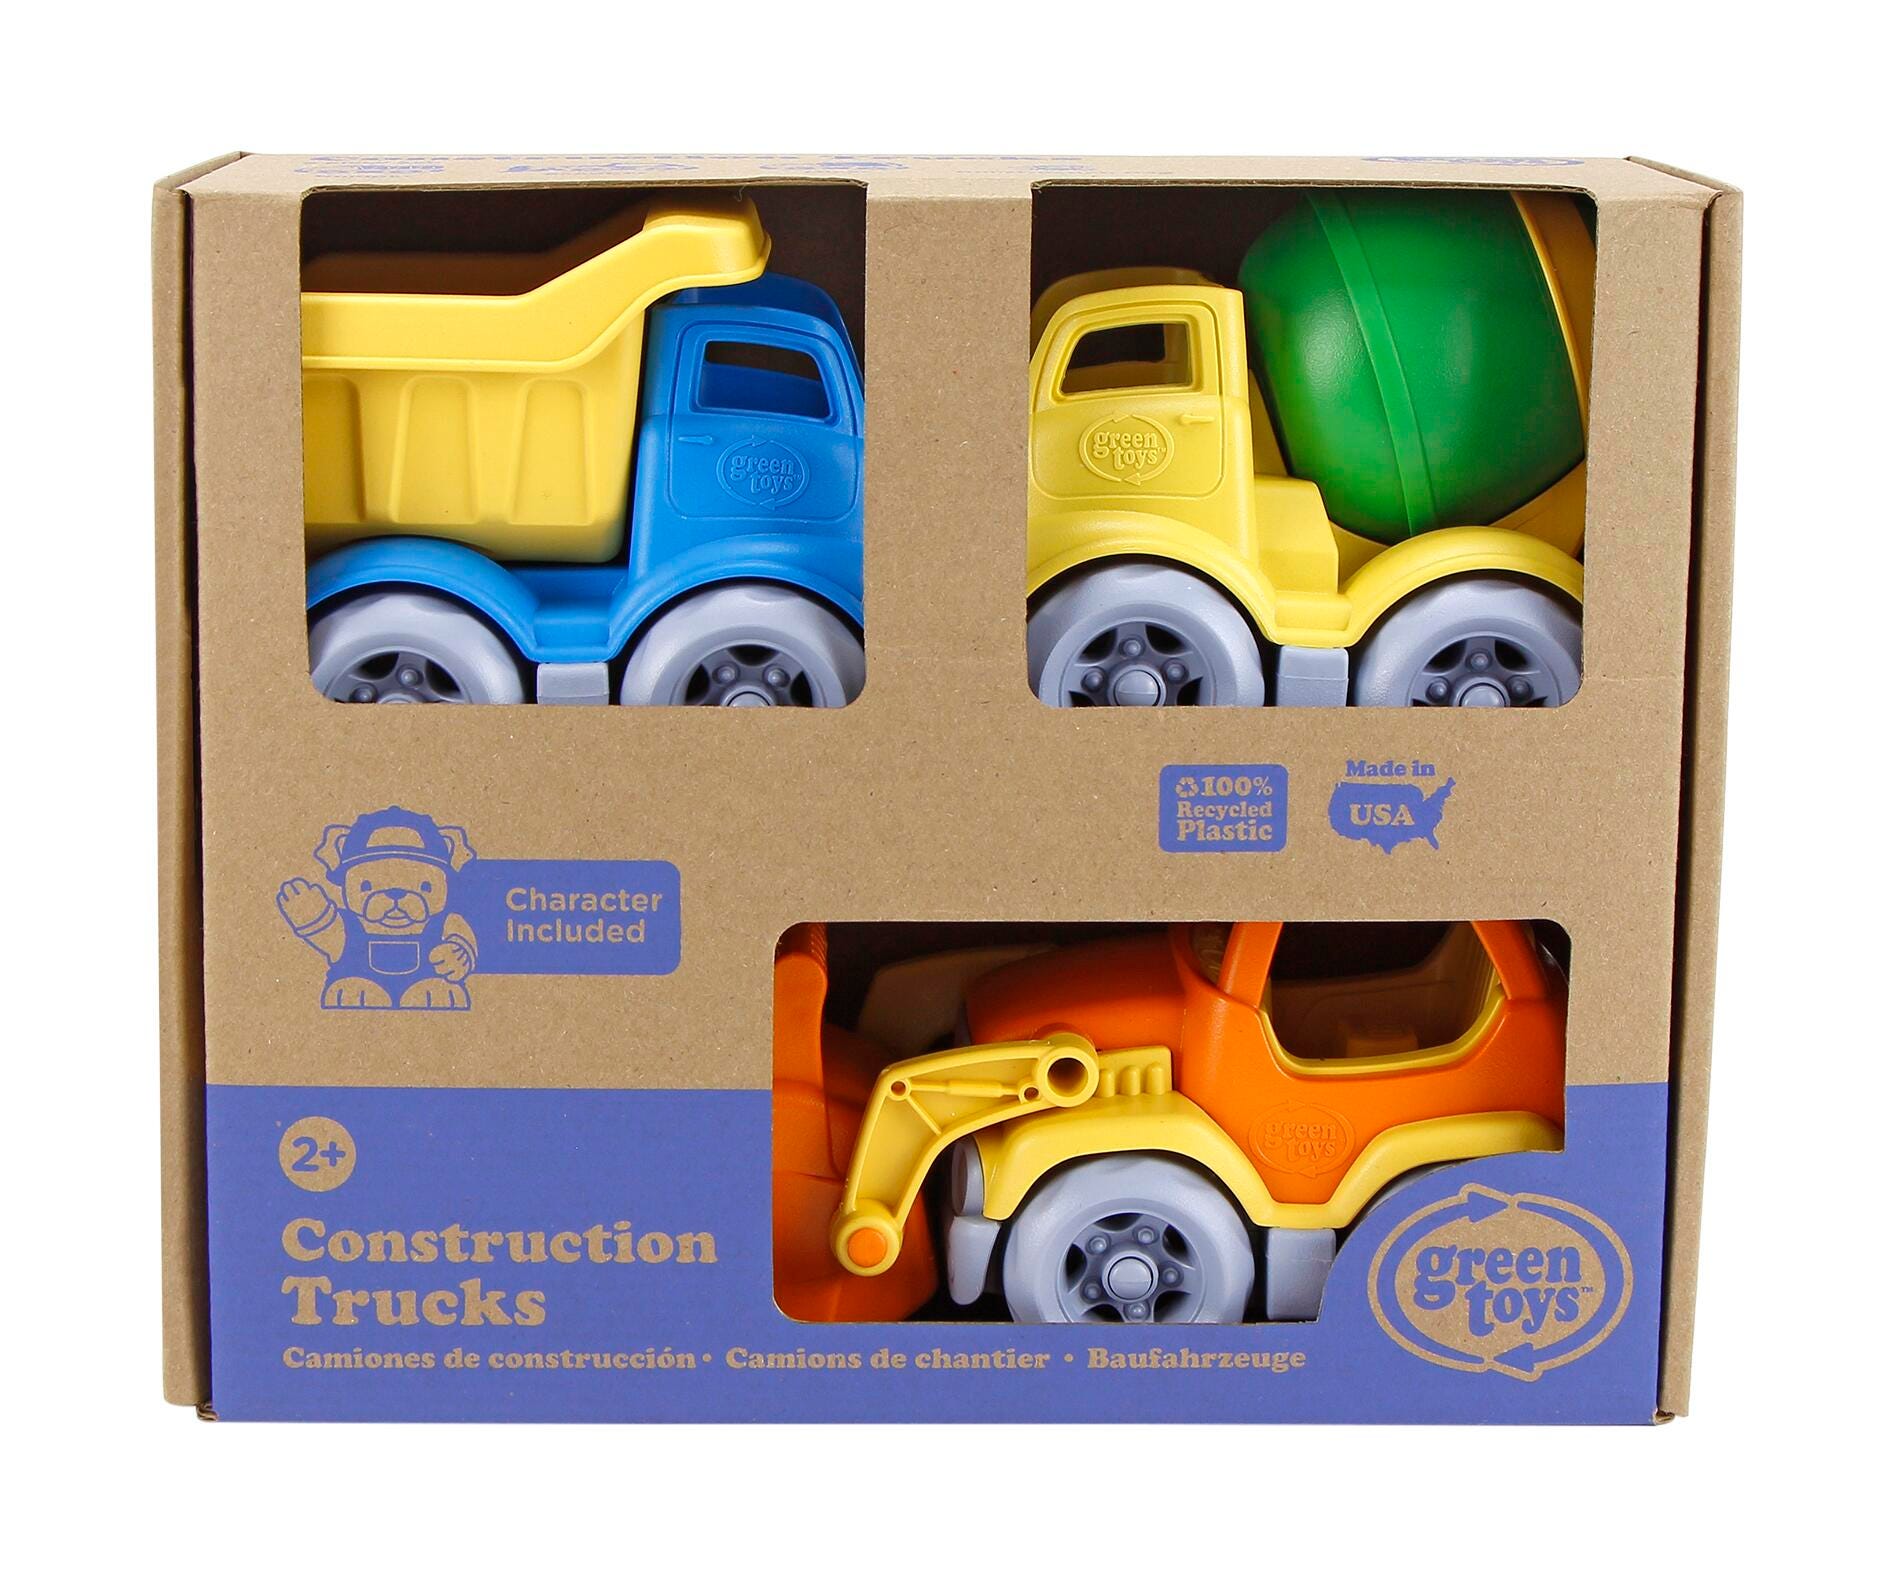 Green Toys Construction Truck, Set of 3 - image 2 of 3